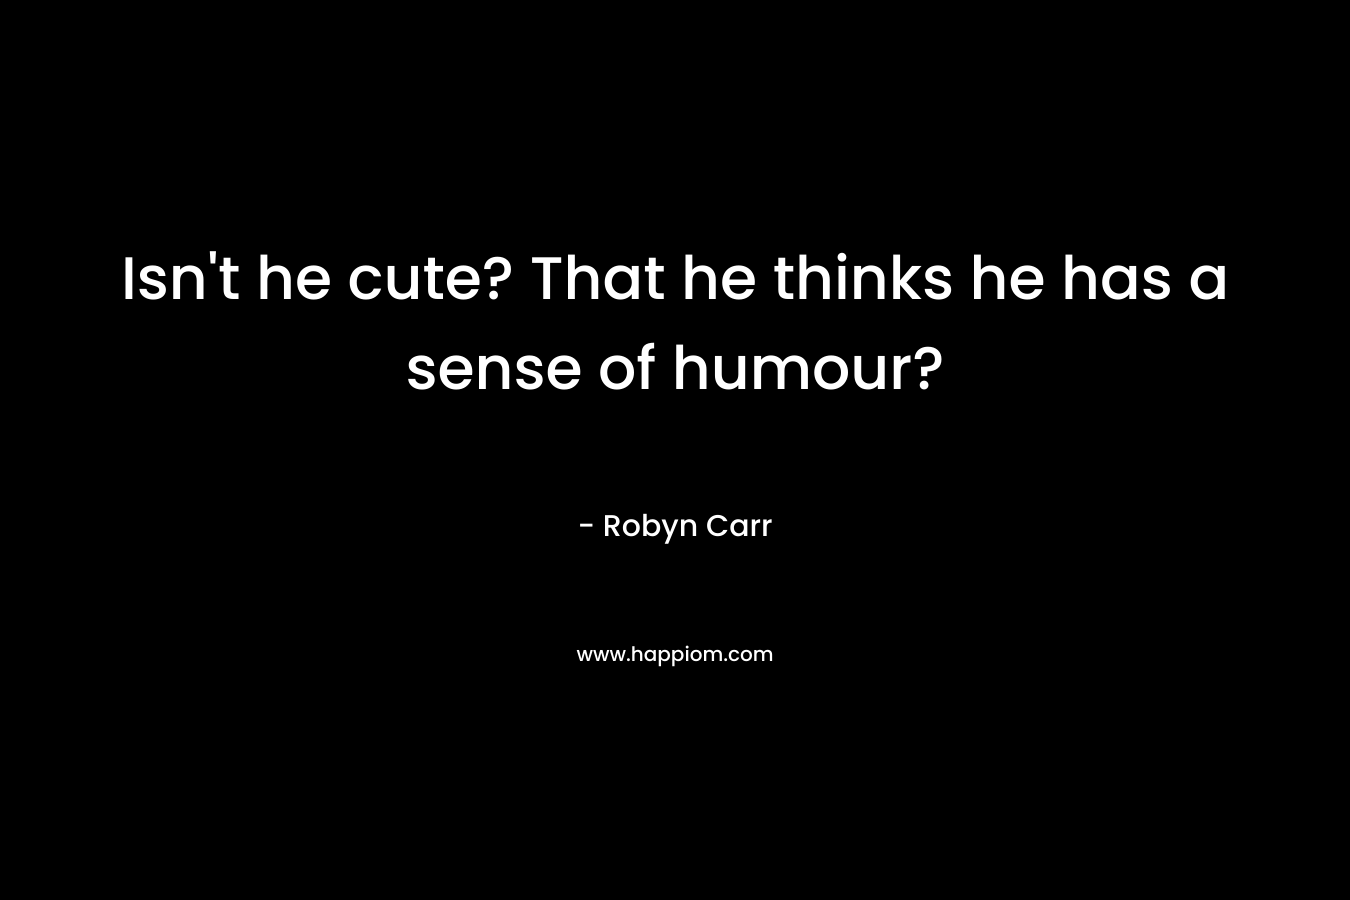 Isn’t he cute? That he thinks he has a sense of humour? – Robyn Carr